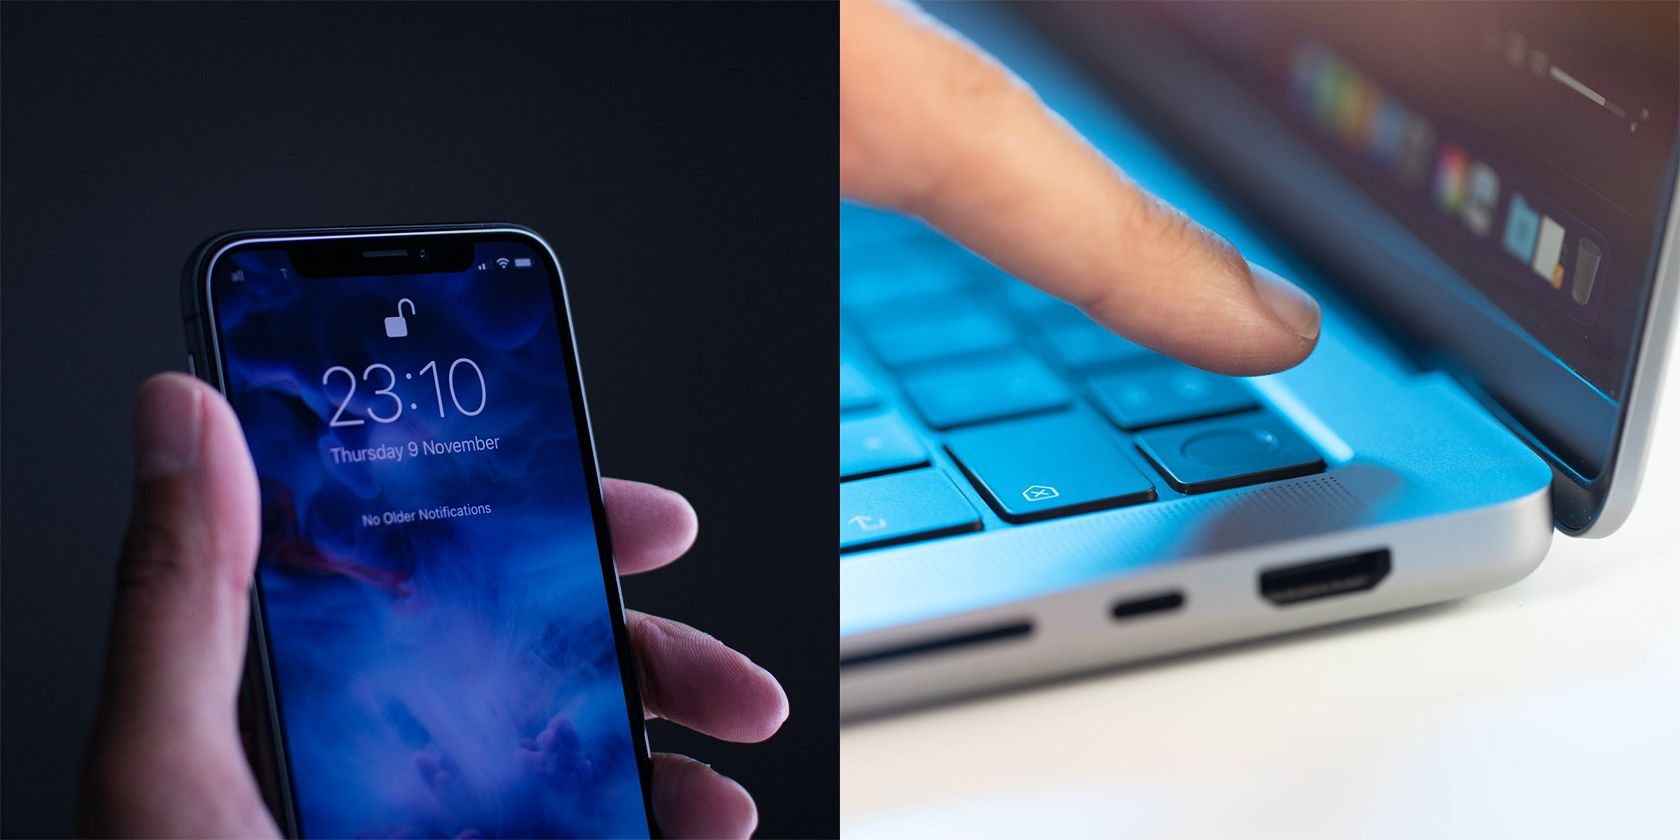 How accurate is Face ID vs Touch ID?